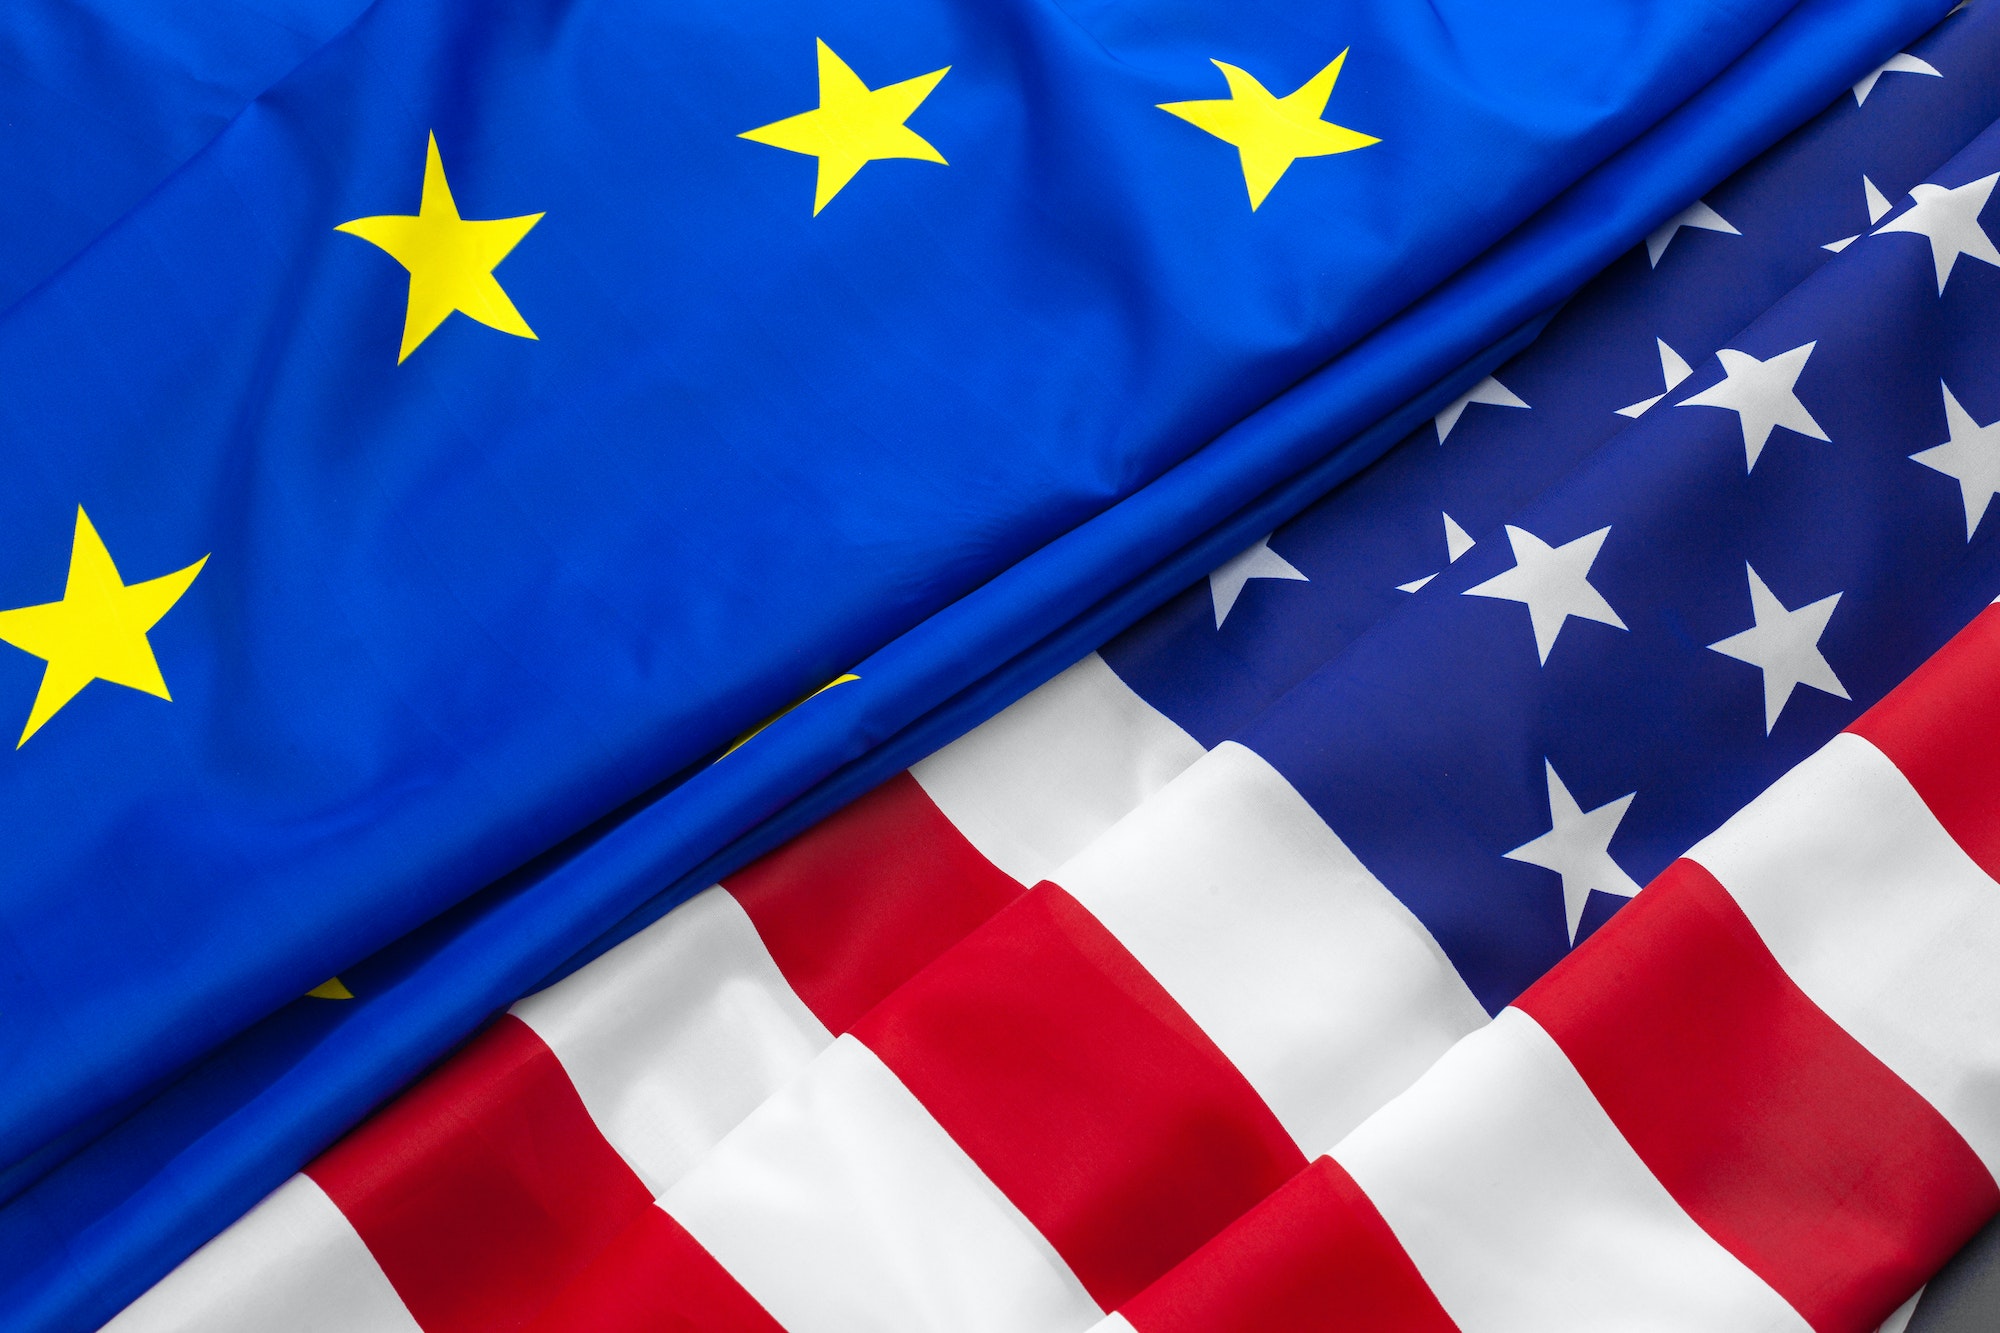 European union and american flag. Business and politics concept